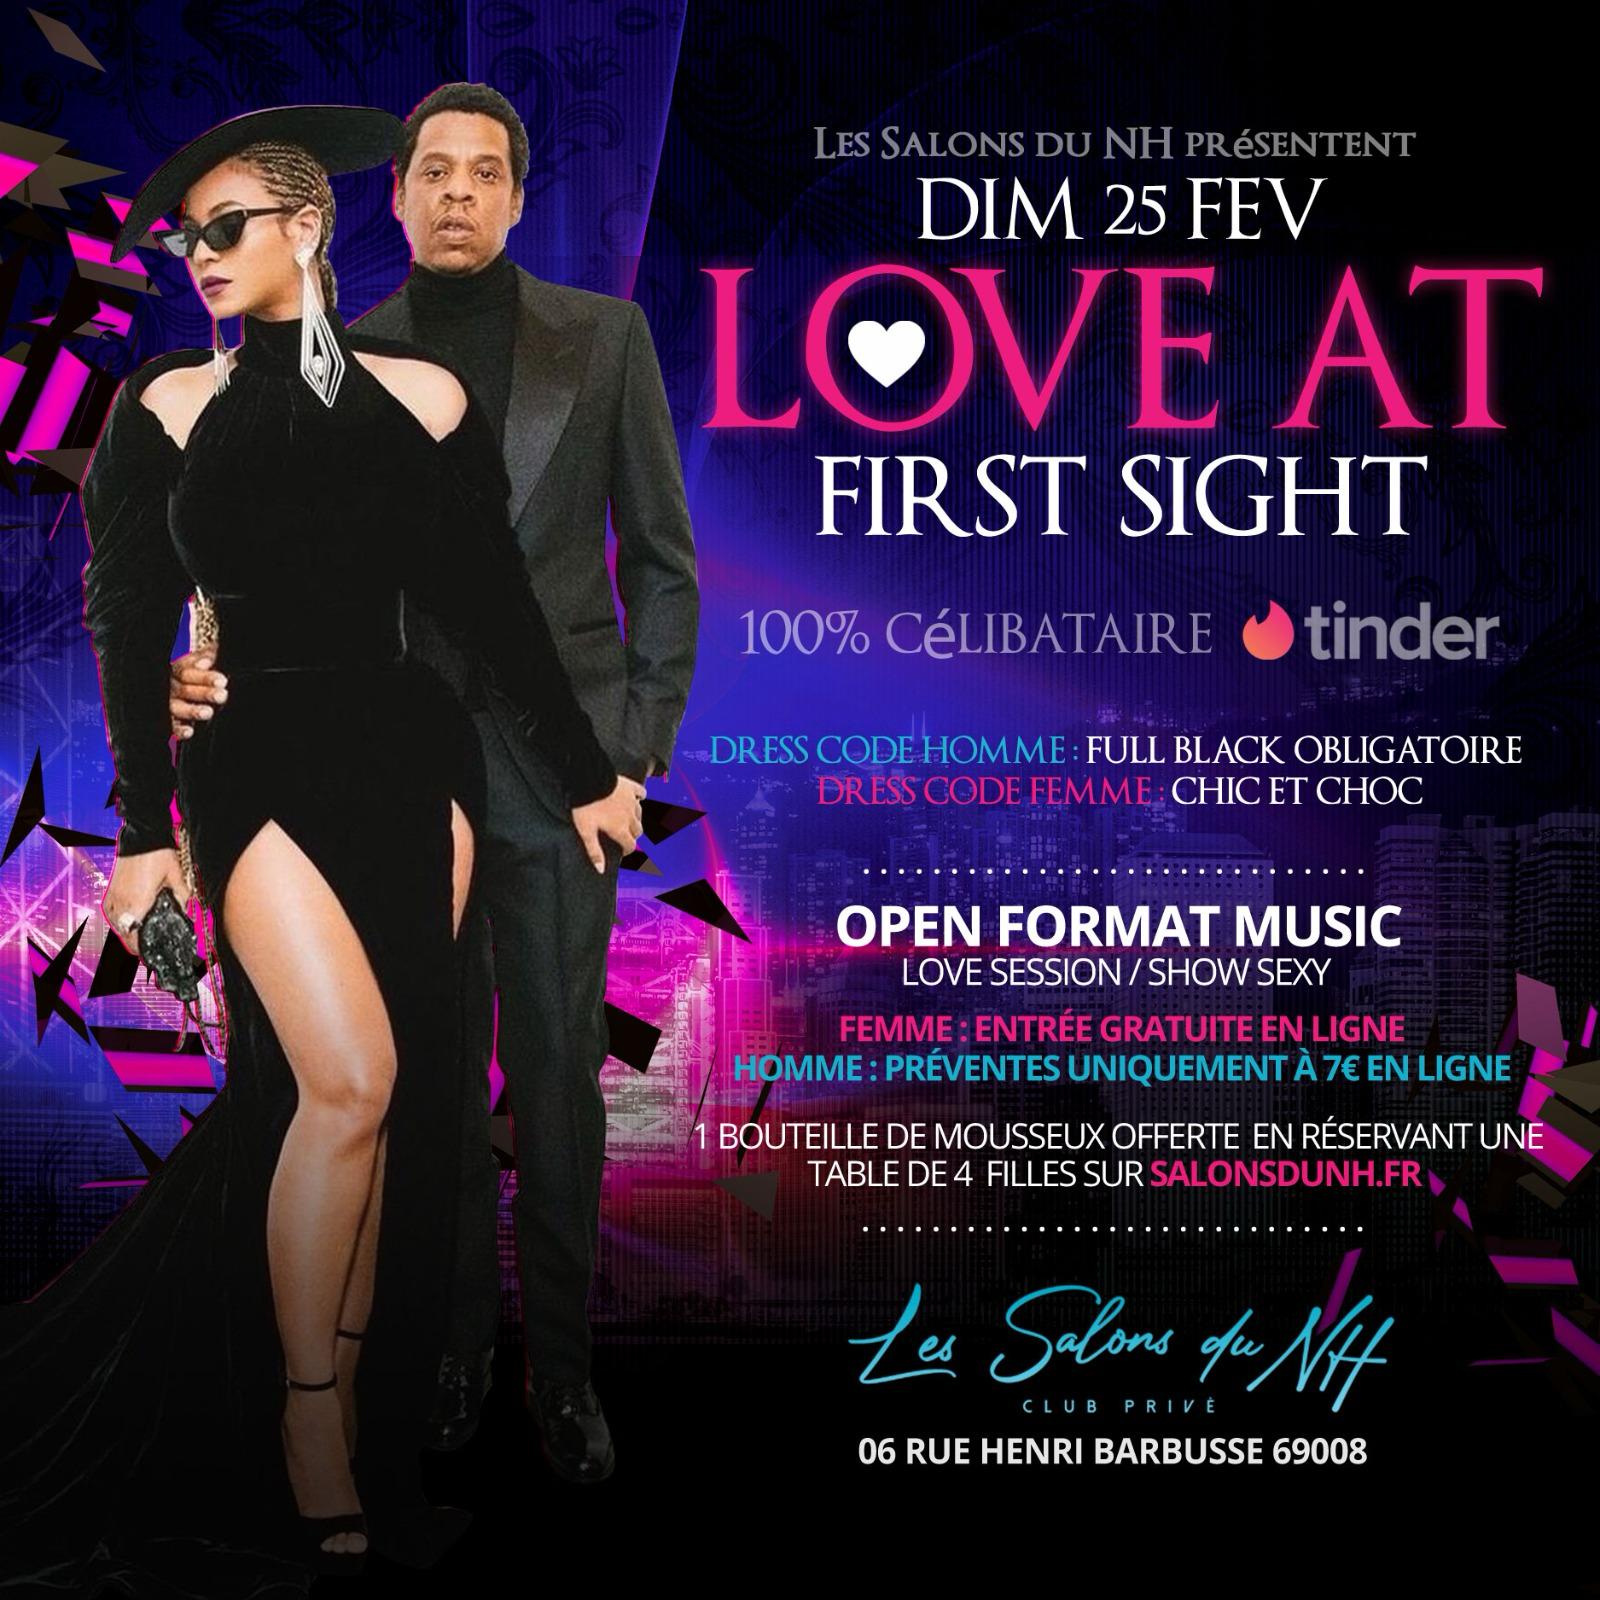 LOVE AT THE FIRST SIGHT (SOIREE CELIB ) @ NH